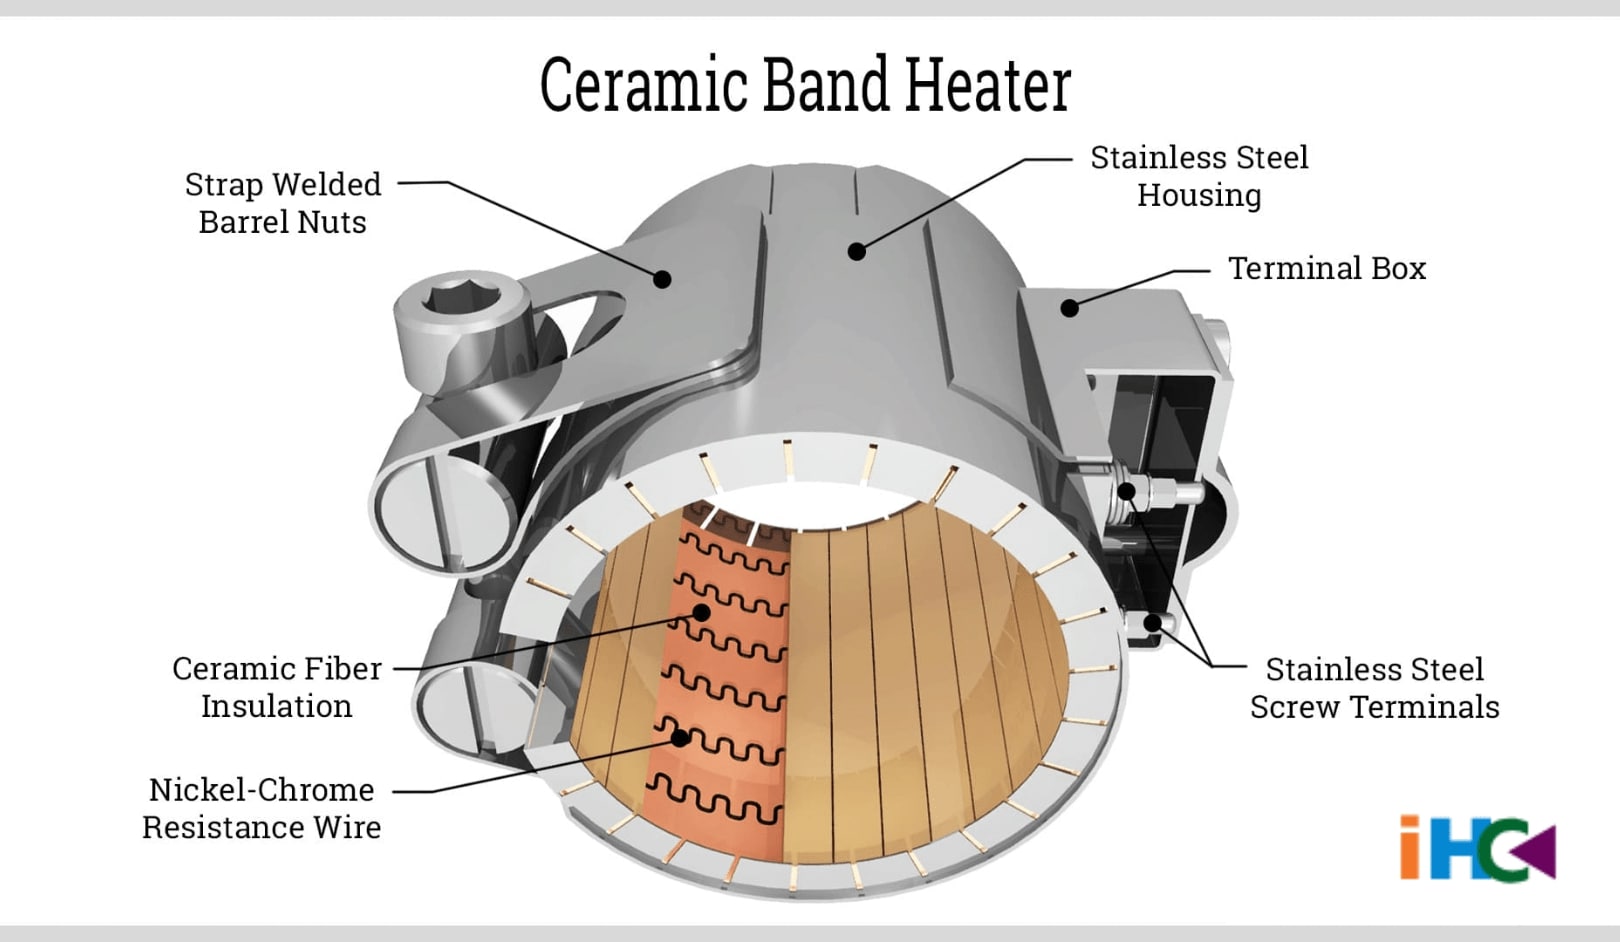 Ceramic Band Heater Manufacturer, Exporter, and Supplier from Delhi, India